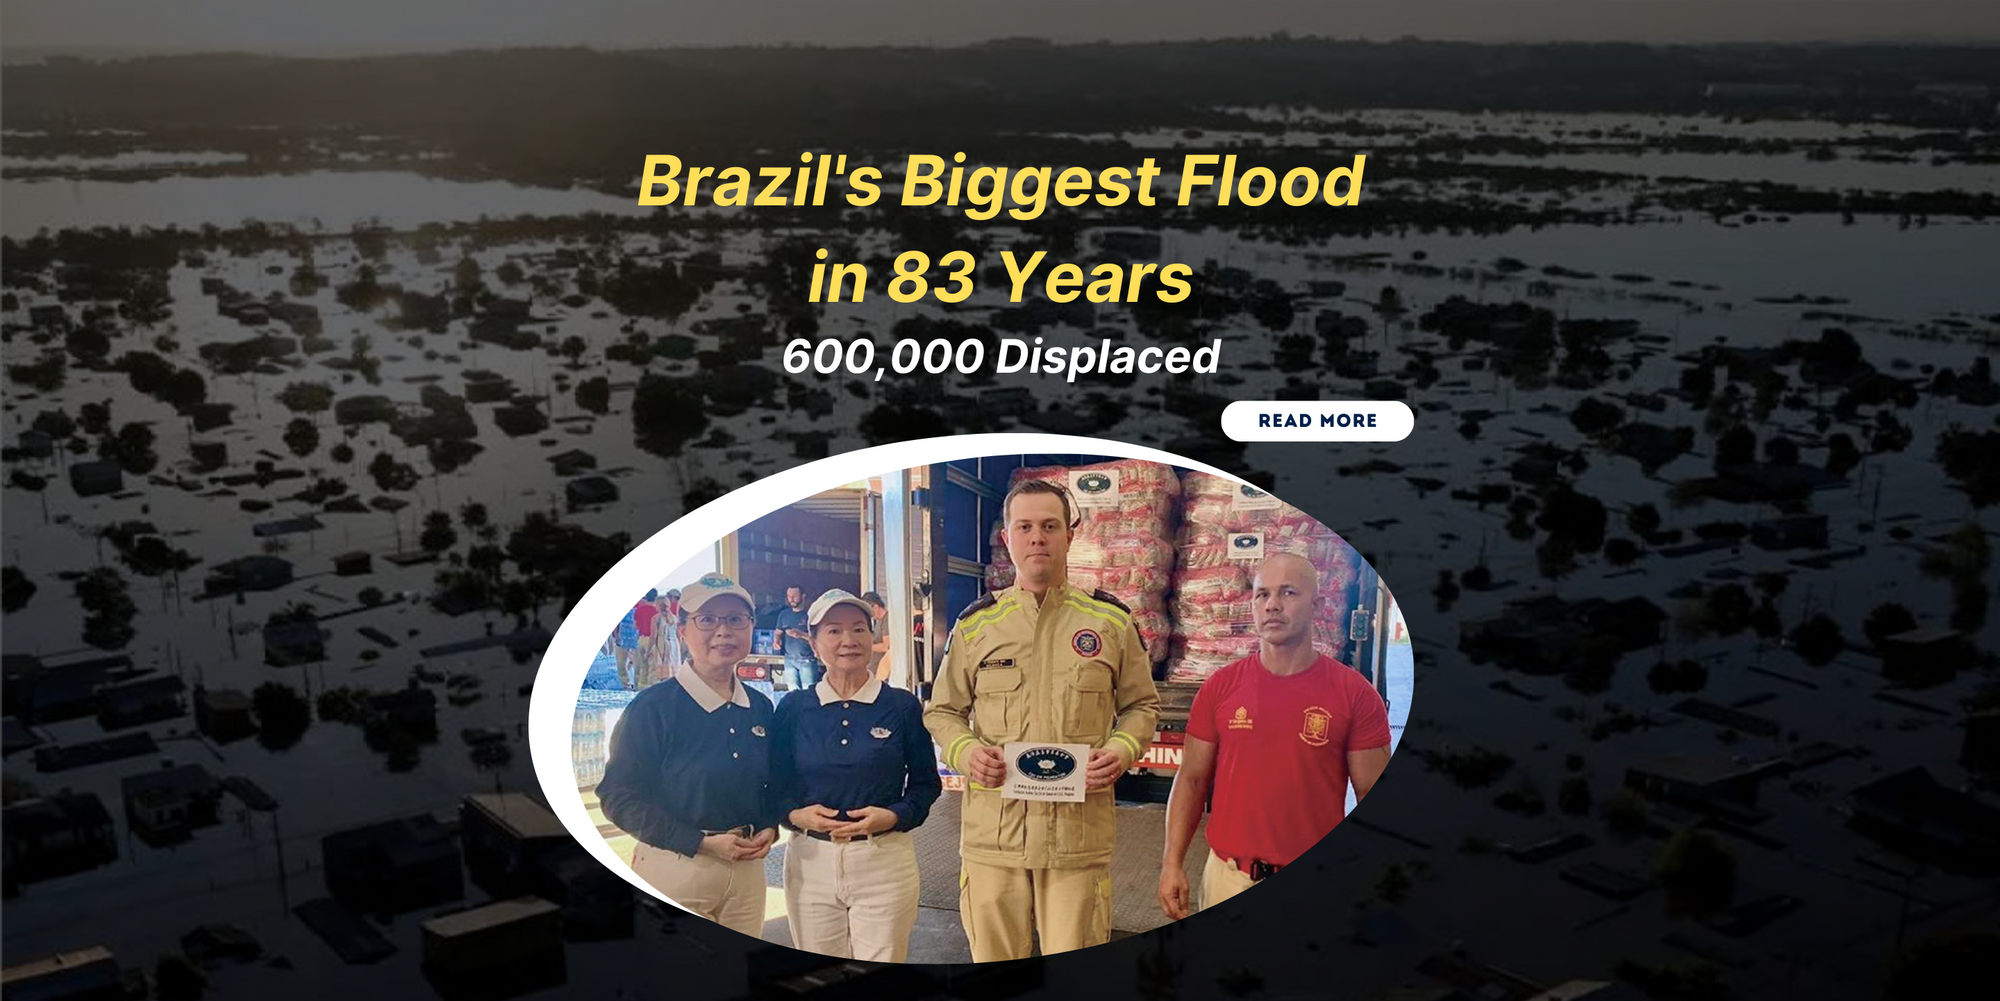 Brazil's Biggest Flood in 83 Years: 600,000 Displaced